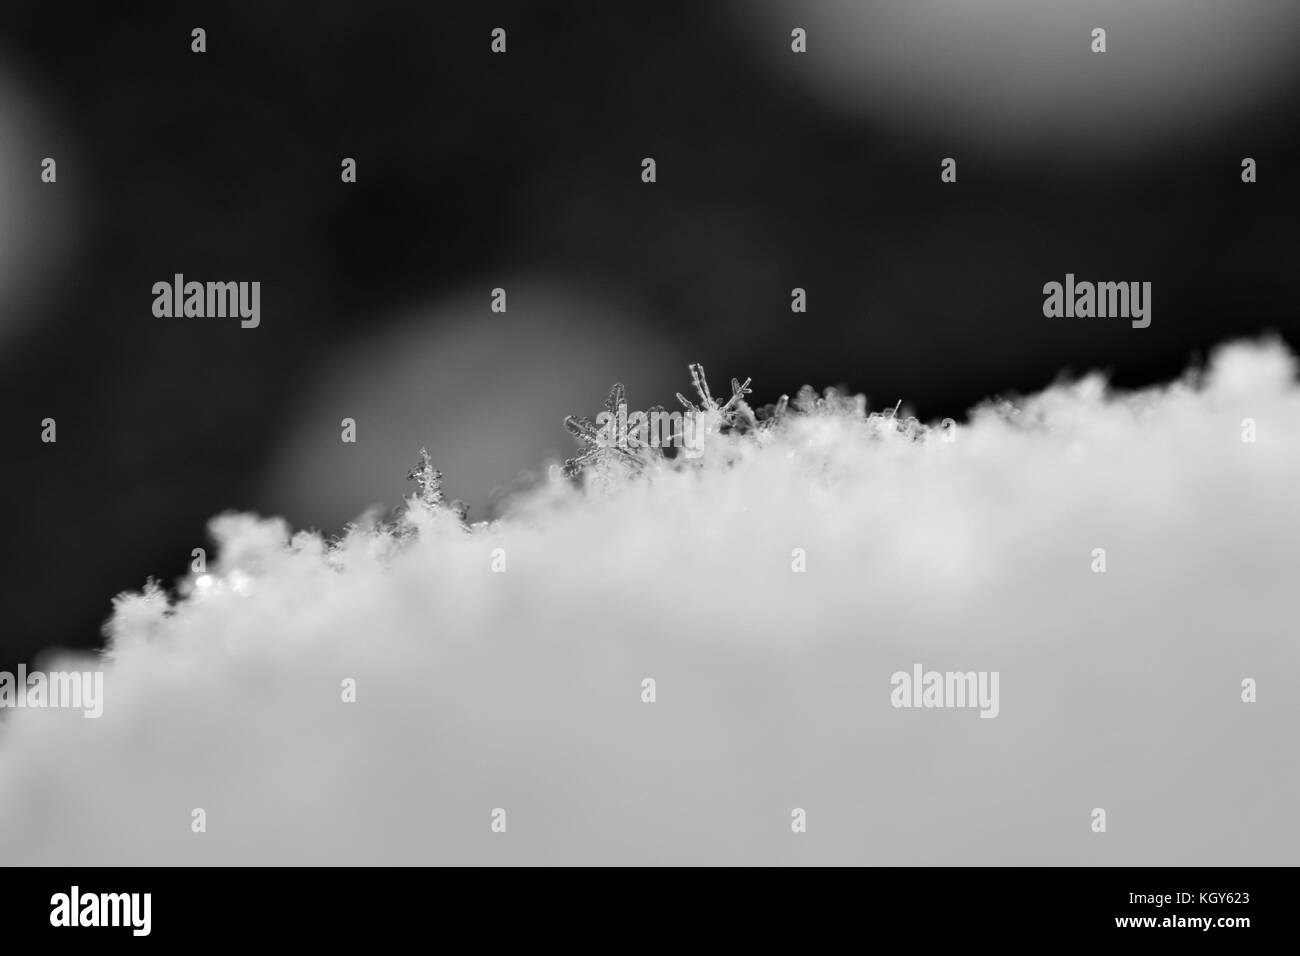 Close up of snowflakes during early snowfall in black and white Stock Photo